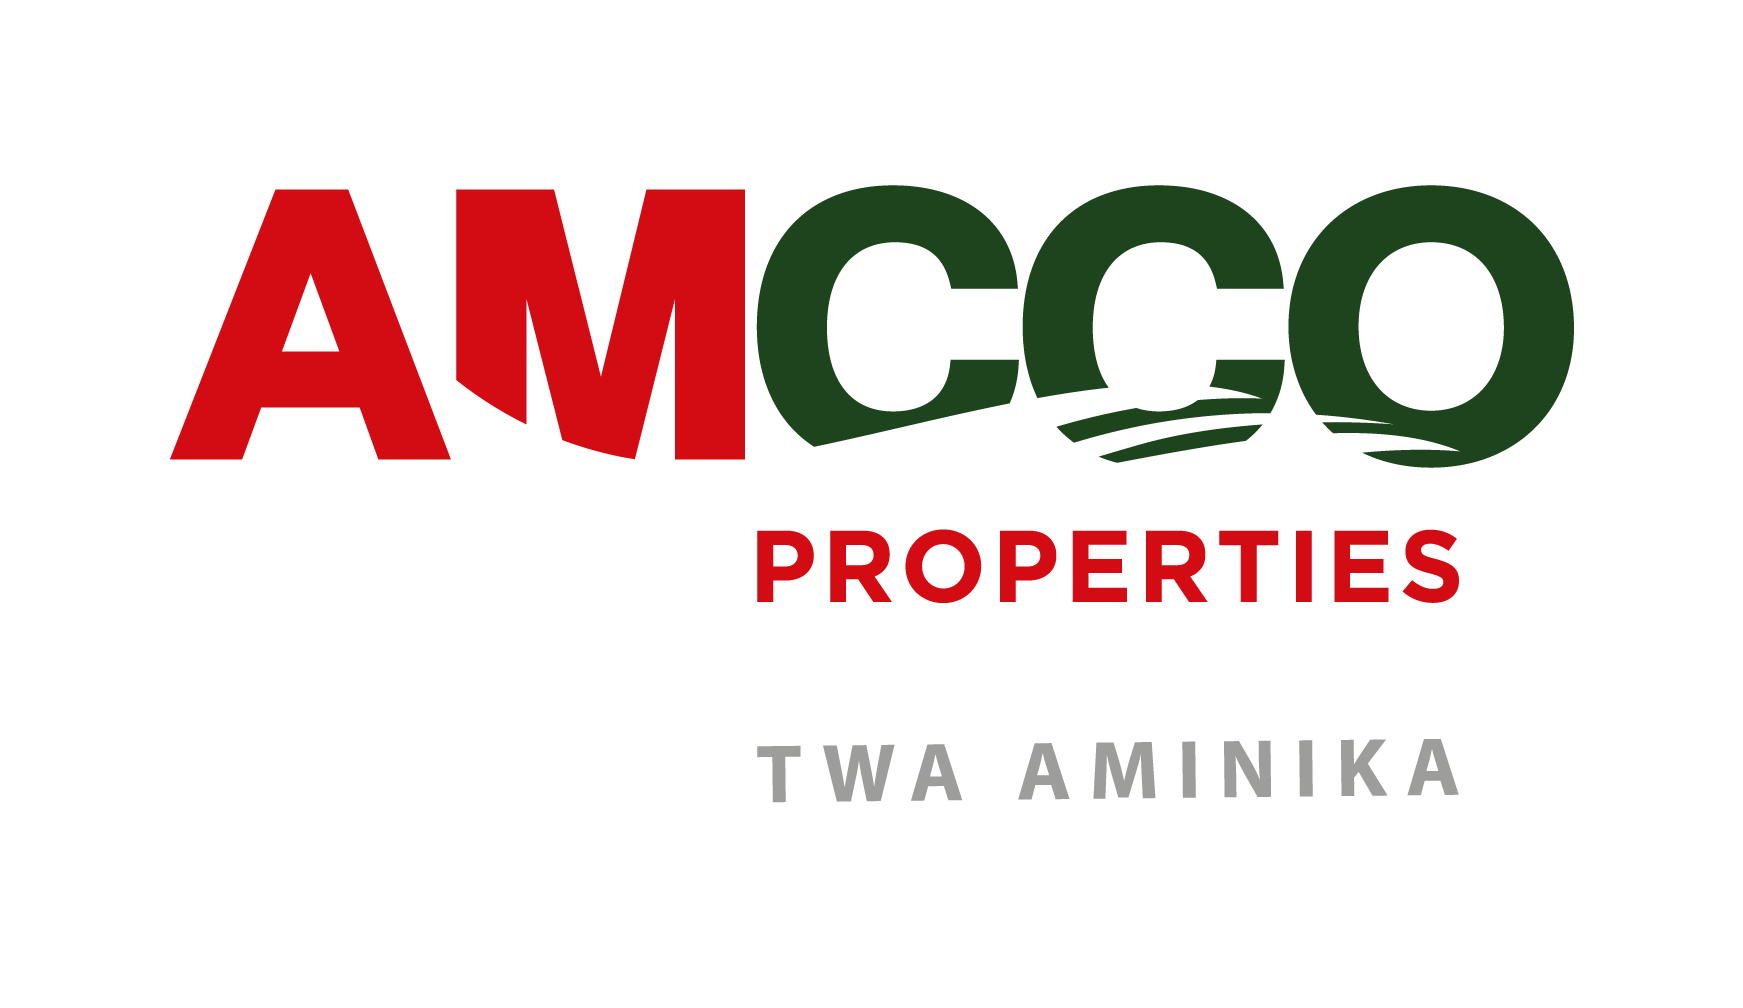  Amcco Properties Limited